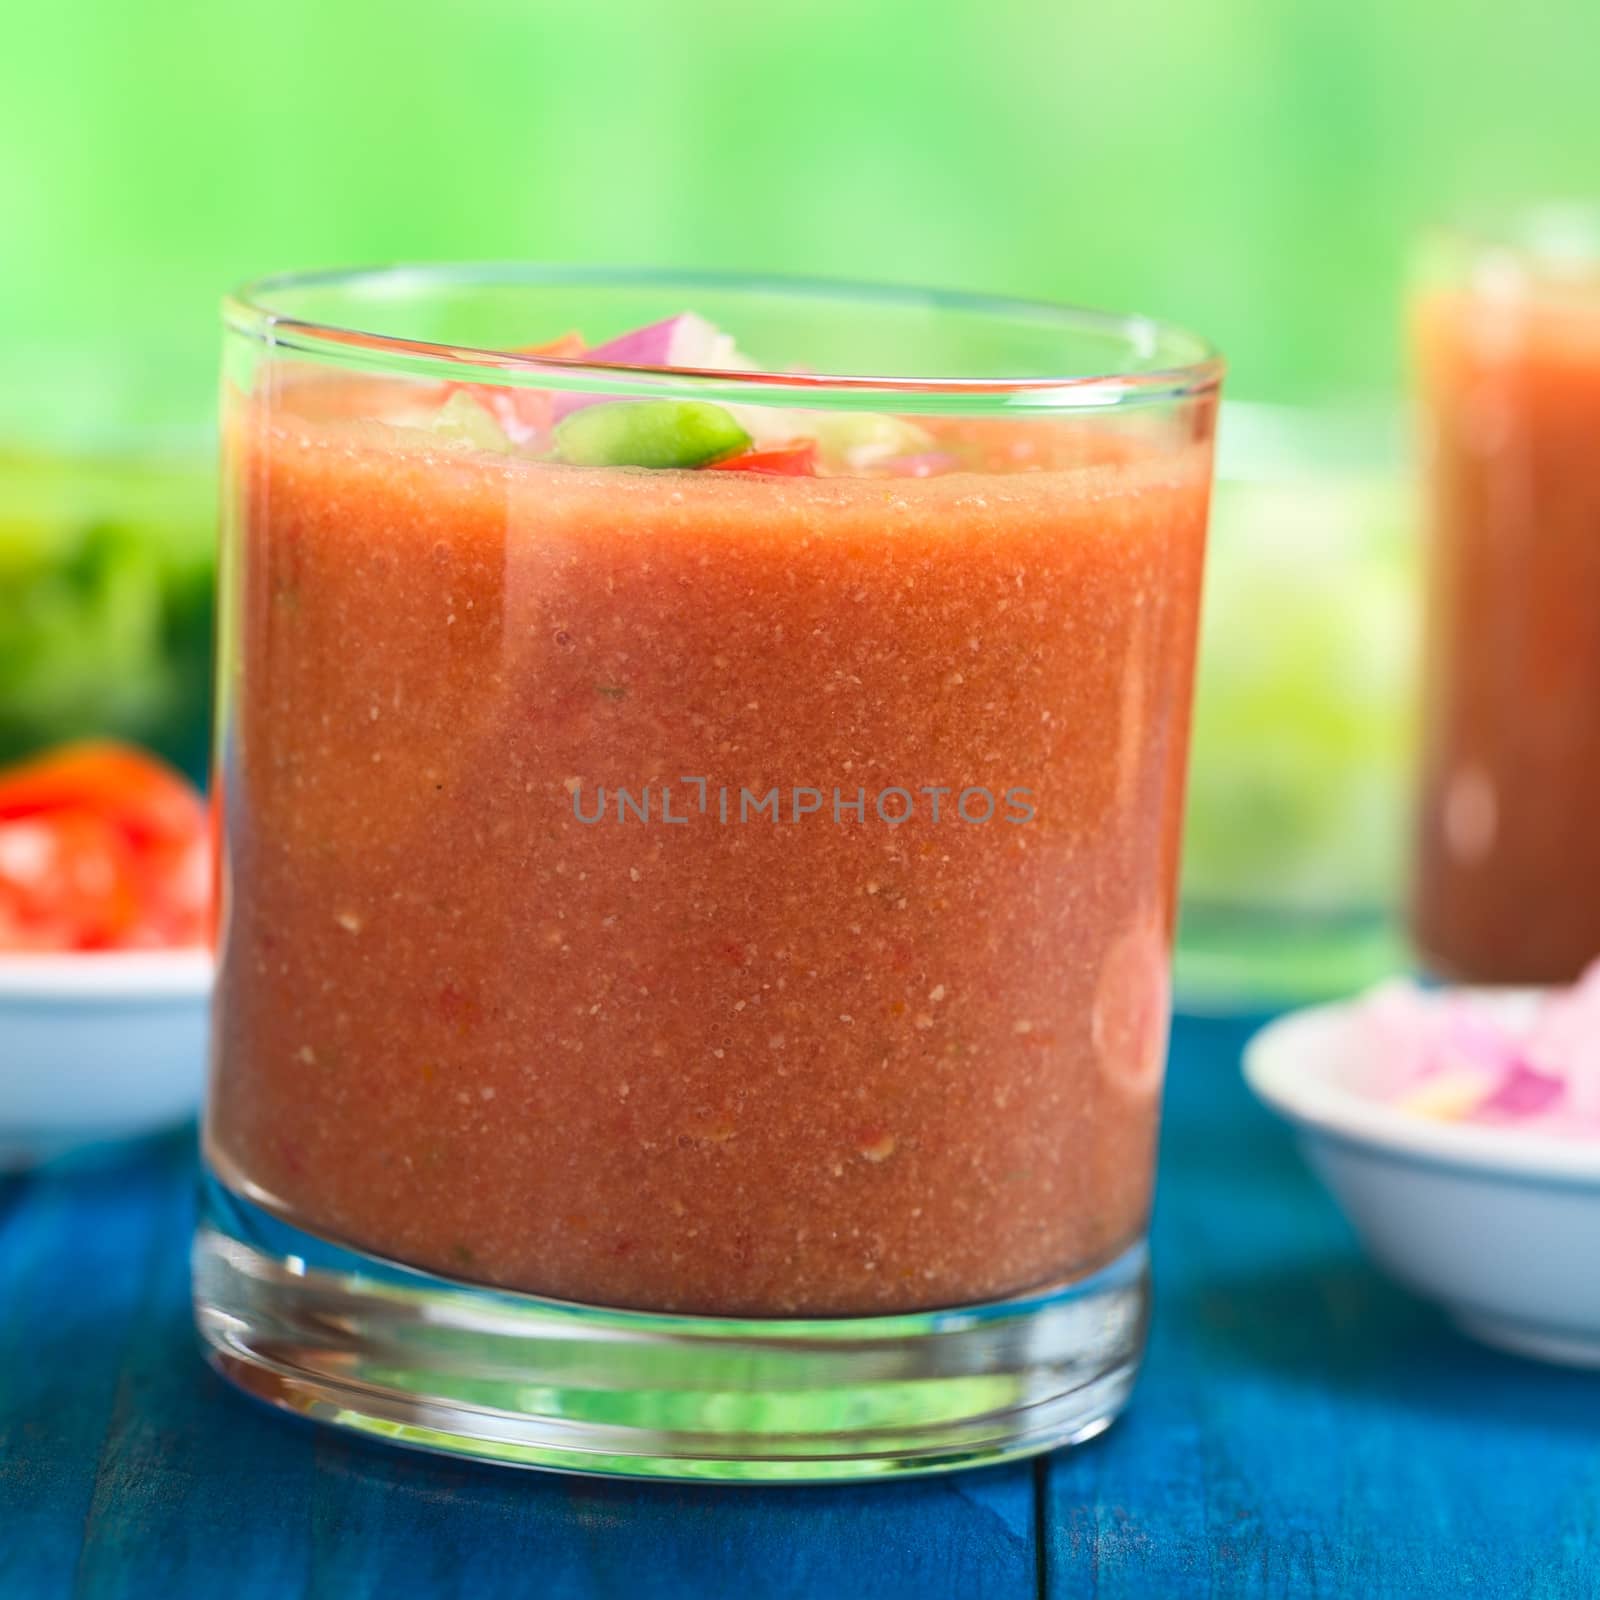 Traditional Spanish cold vegetable soup made of tomato, cucumber, bell pepper, onion, garlic and olive oil served in glass (Selective Focus, Focus on the front of the glass rim)